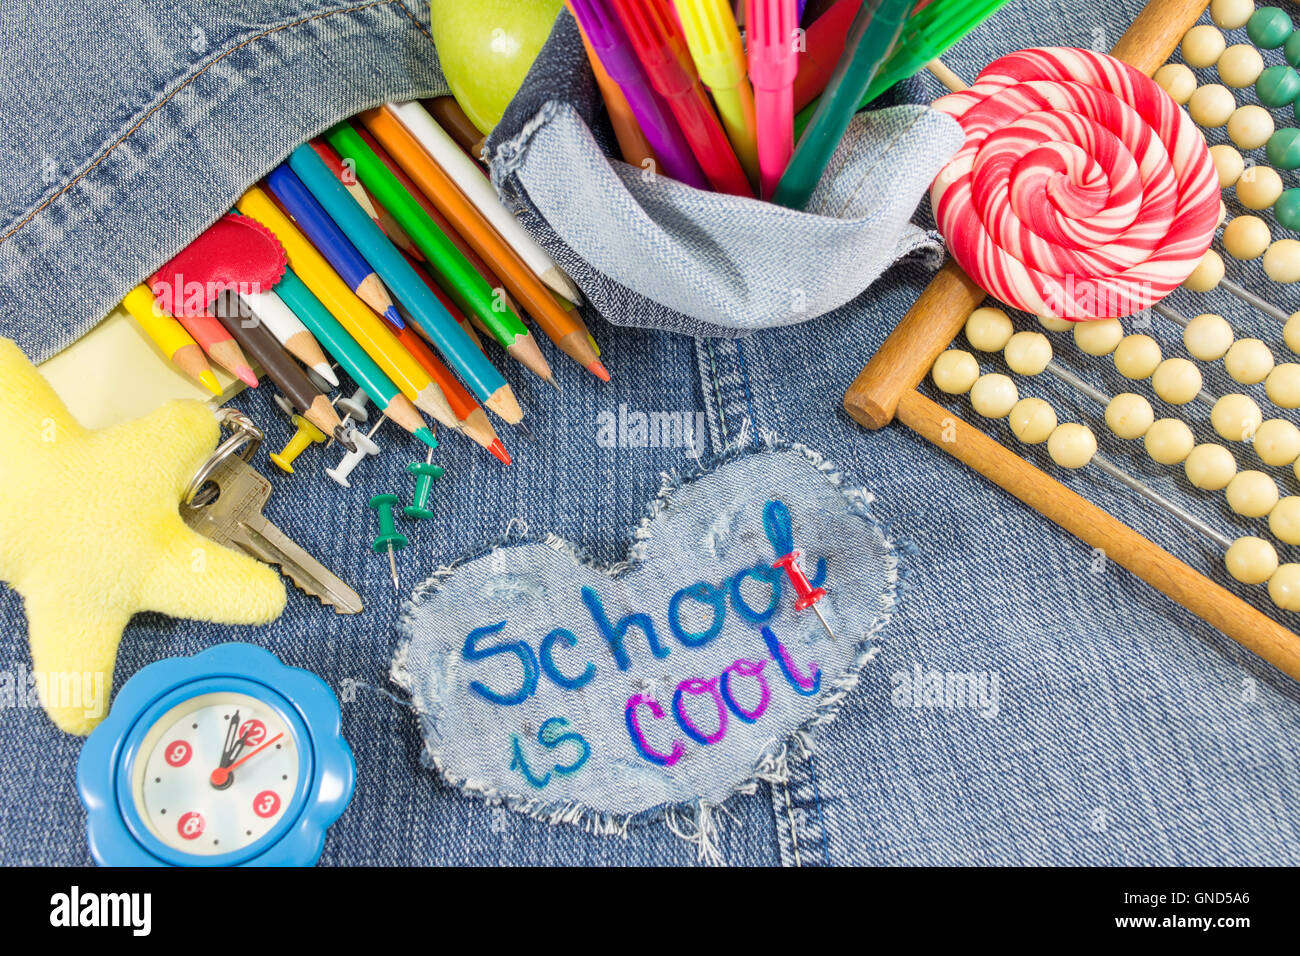 School is cool sign with creative learning objects on blue jeans Stock Photo